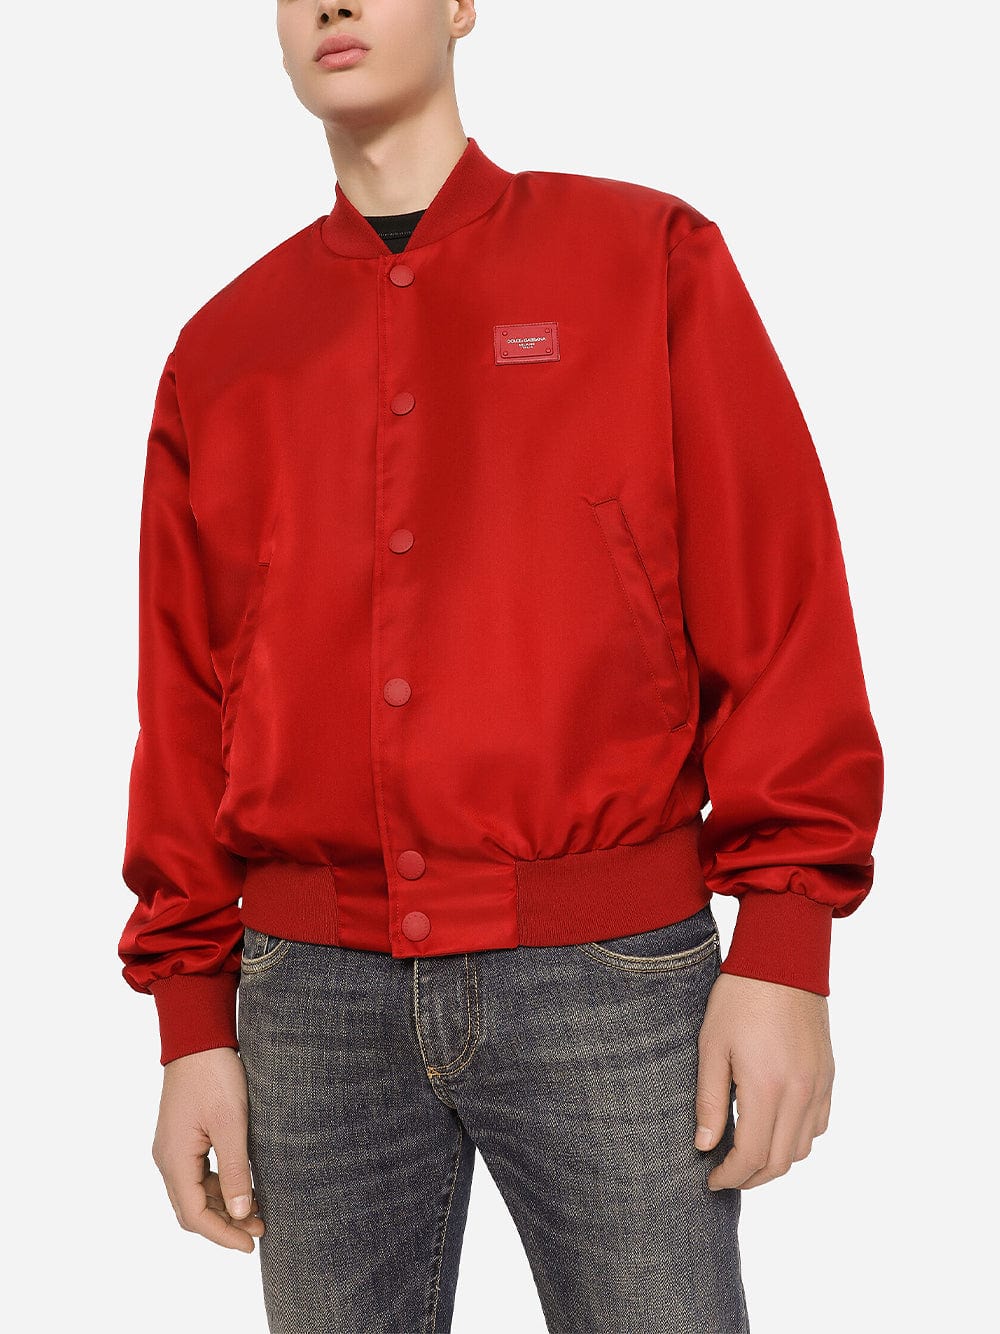 Dolce & Gabbana Nylon Jacket With Branded Plate